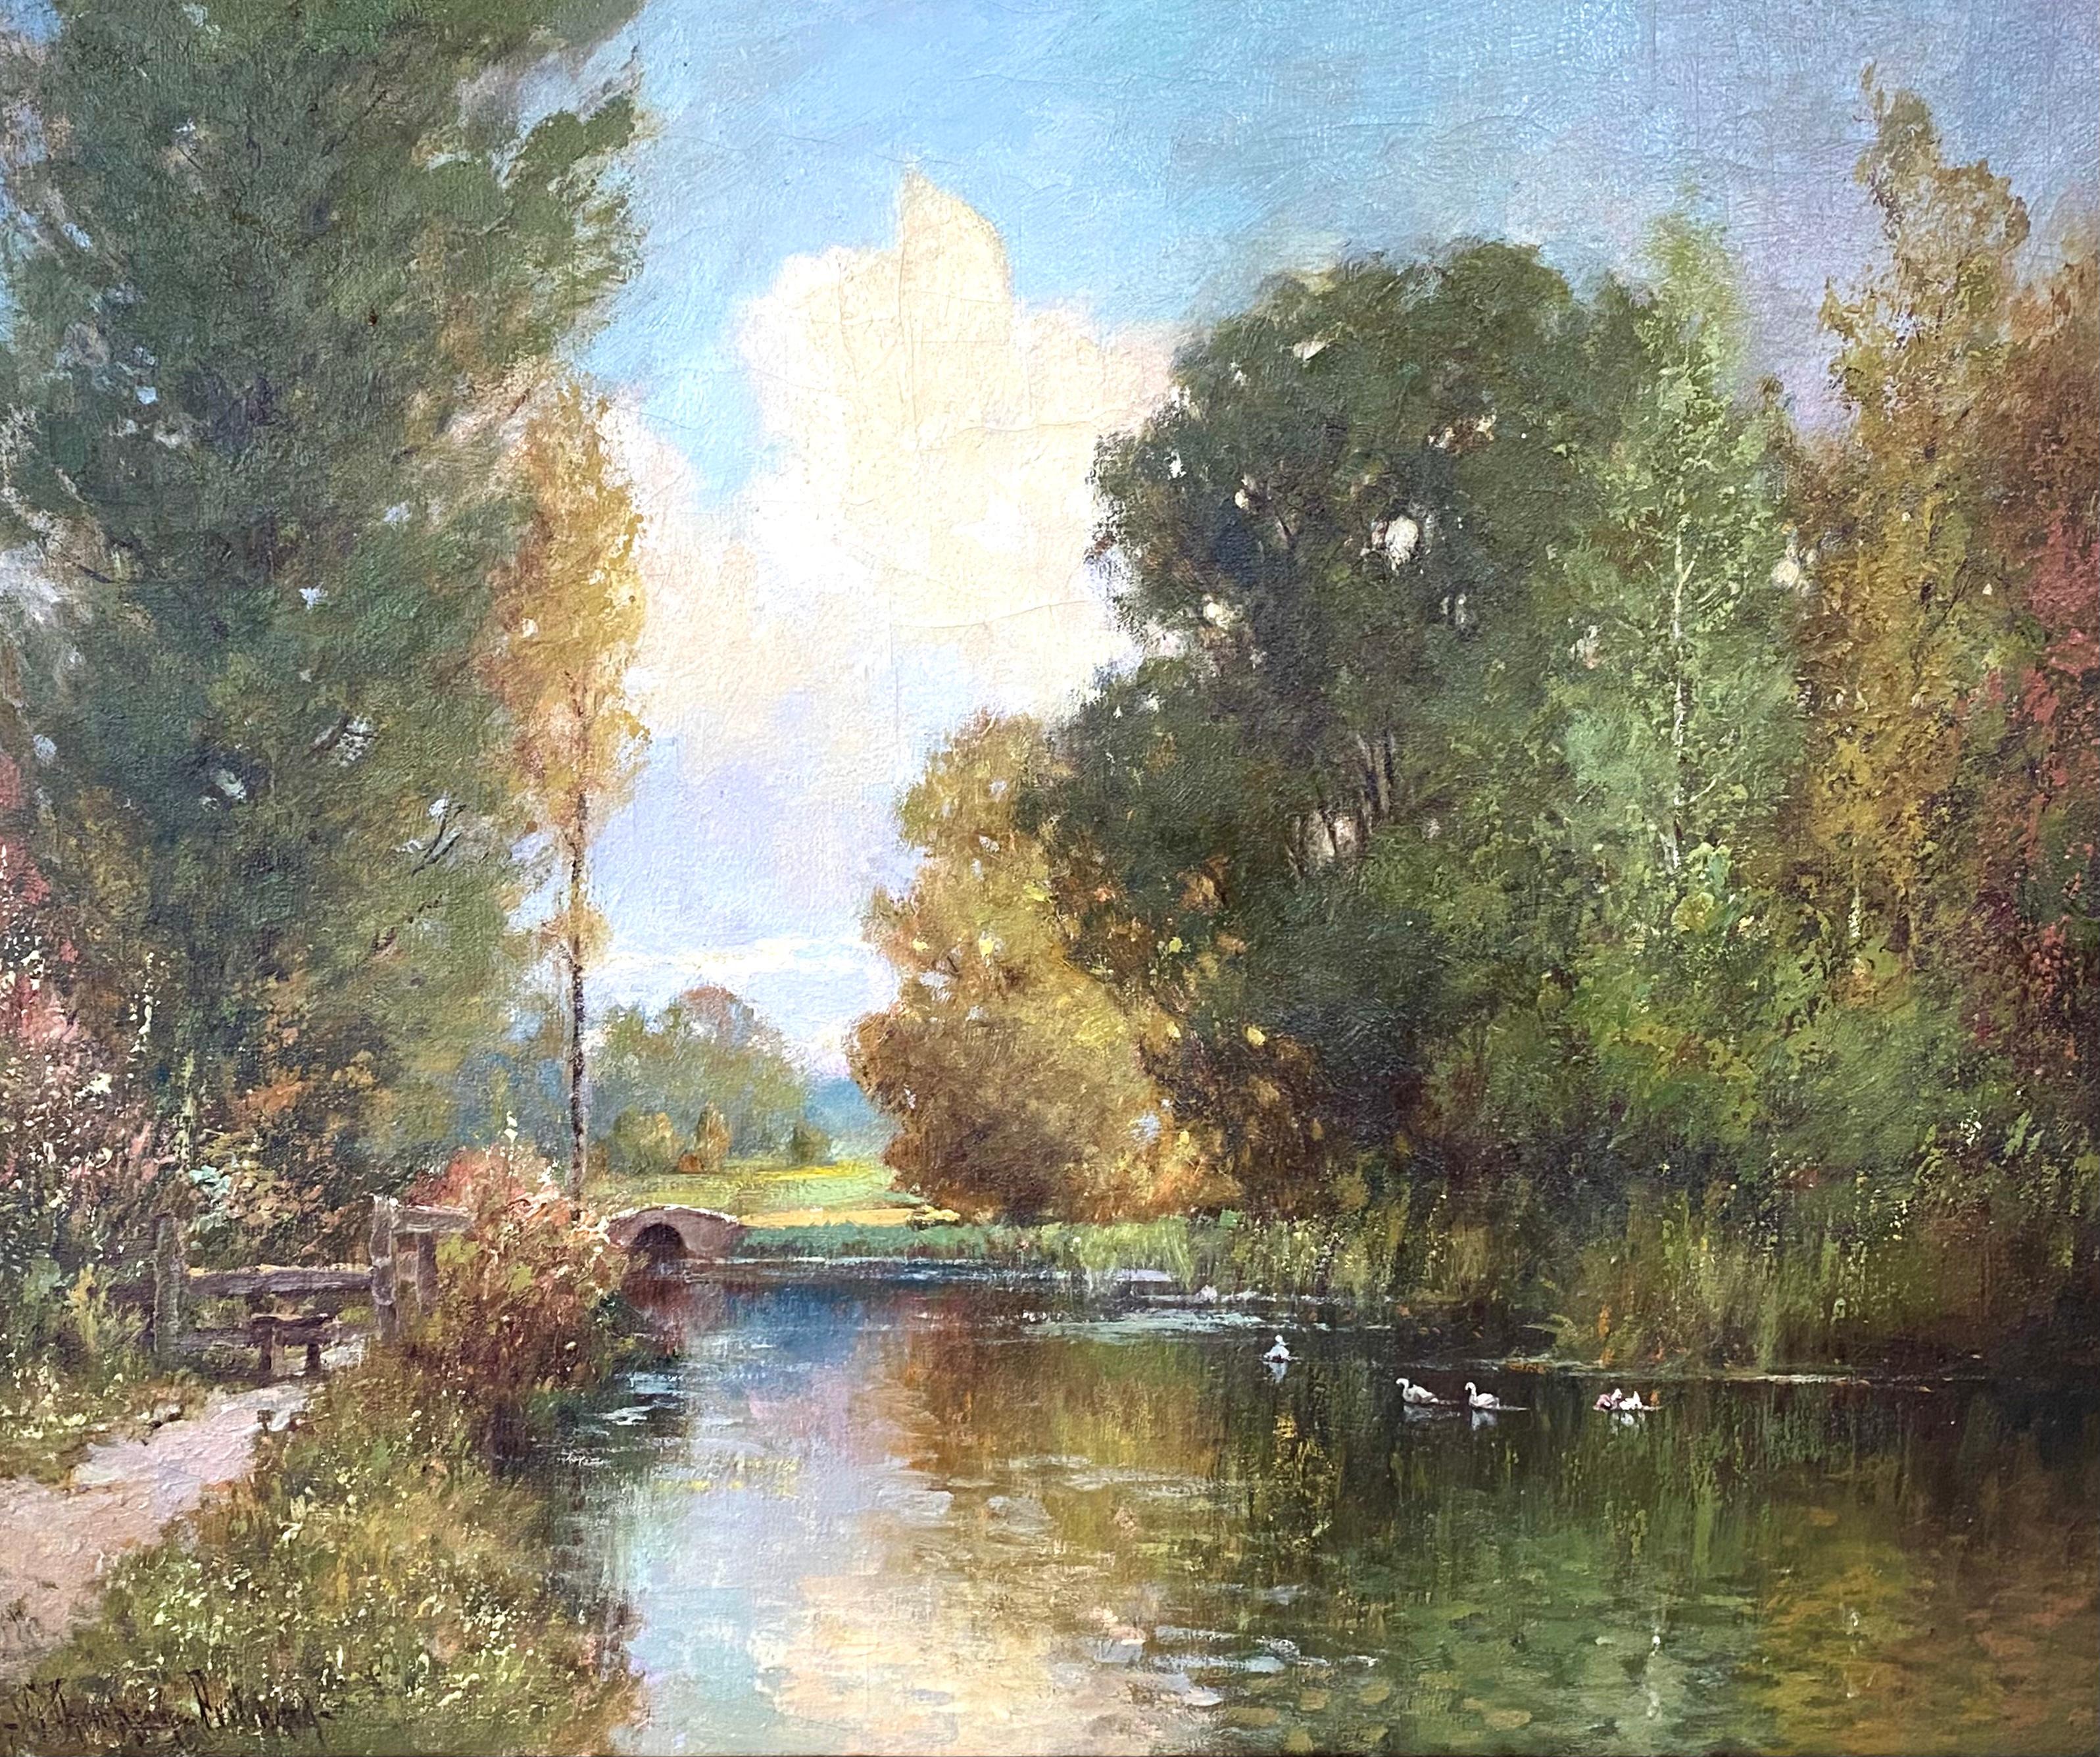 “A Summer’s Day” - Painting by George Thompson Pritchard